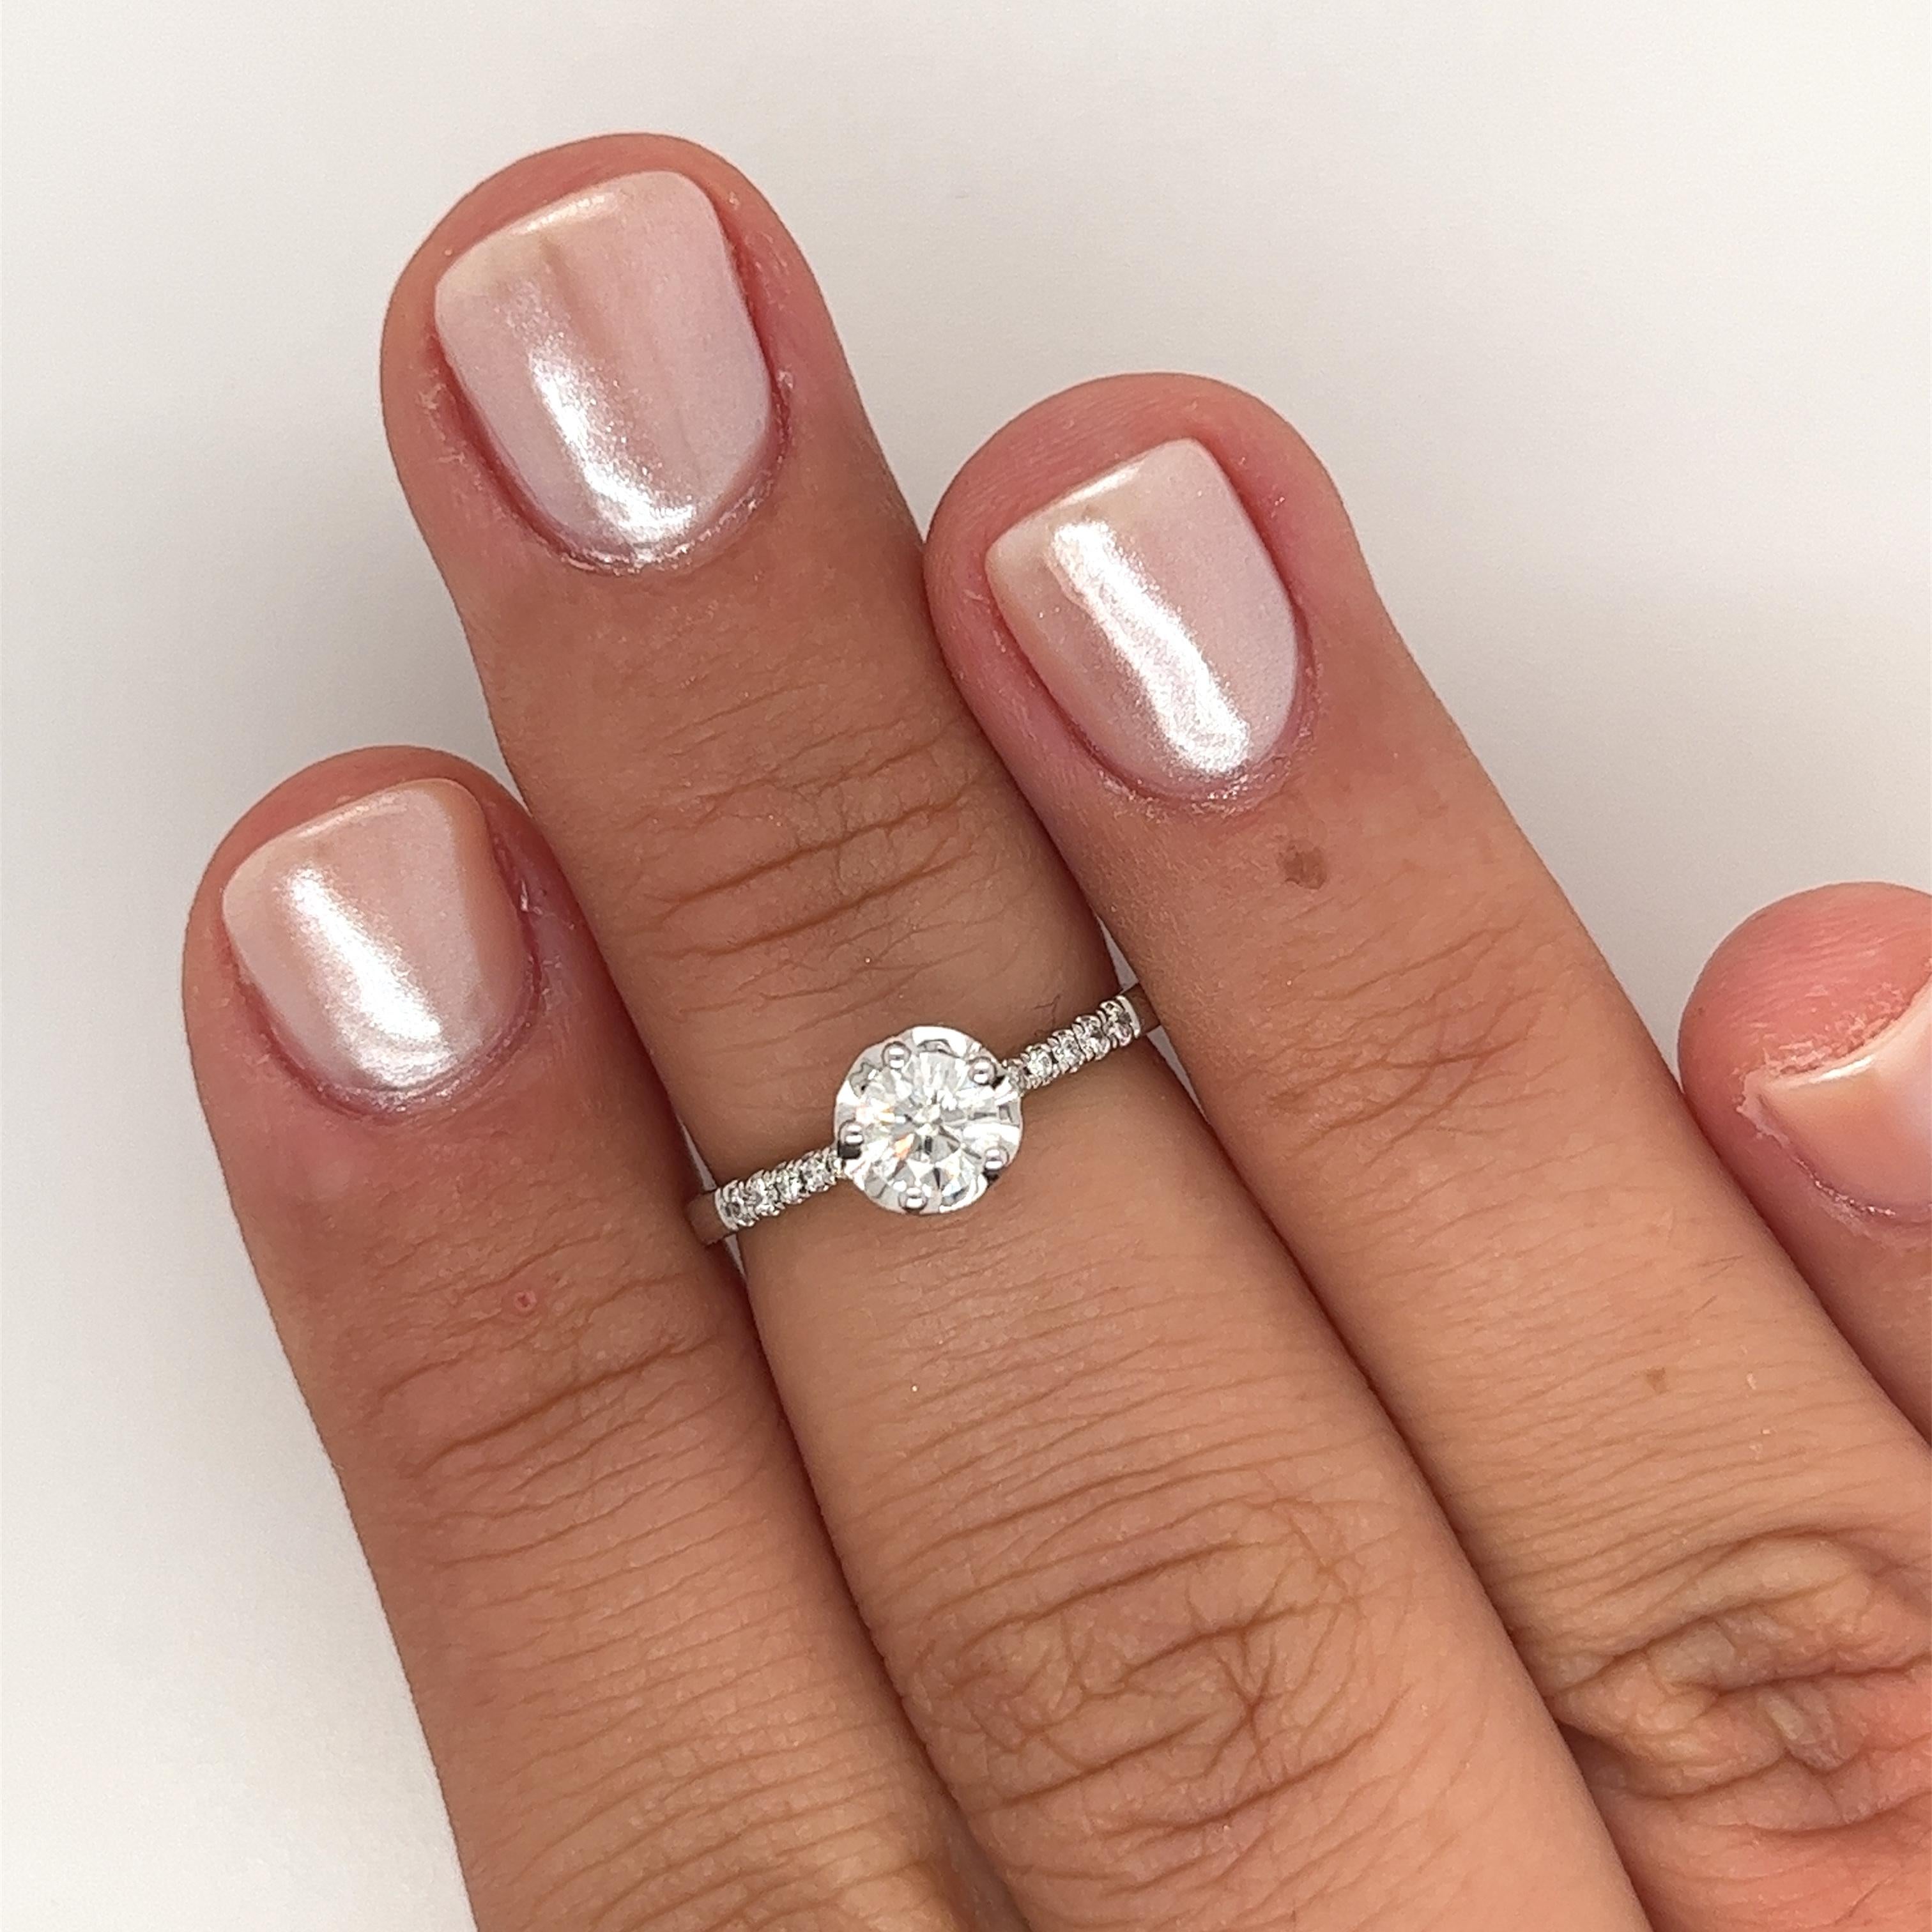 18K White Gold Engagement Ring. The centerpiece is a captivating 0.38 Carat Round Cut Diamond with an H color and VS2 clarity. The ring's elegant design features 10 additional Round Cut Diamonds on the side, totaling 0.06 Carats. Weighing 2.11 grams